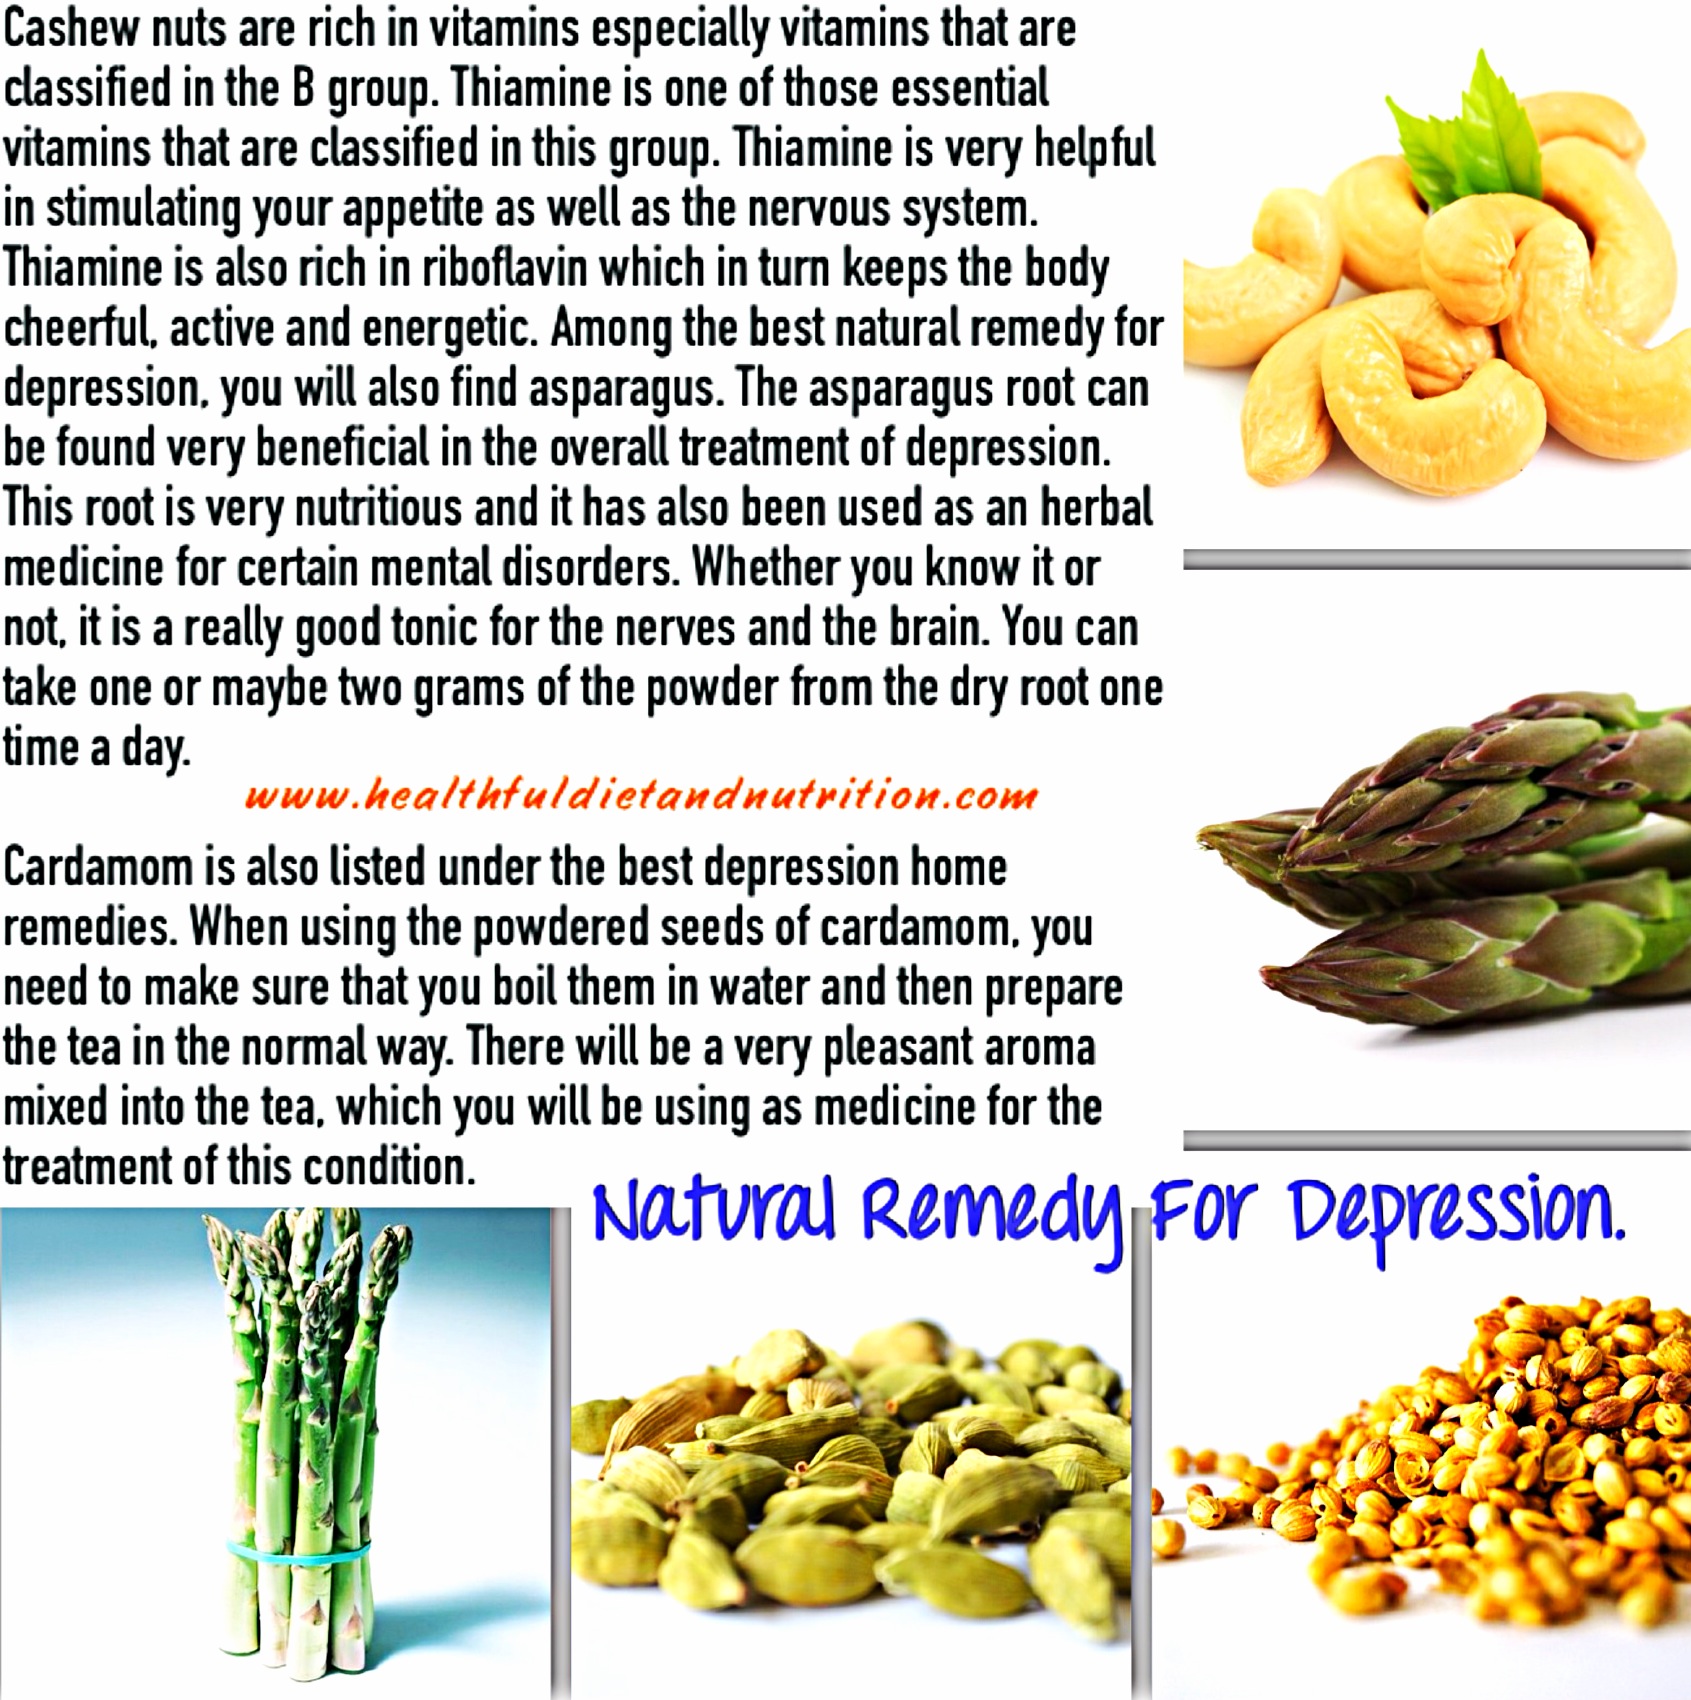 Natural Remedy For Depression